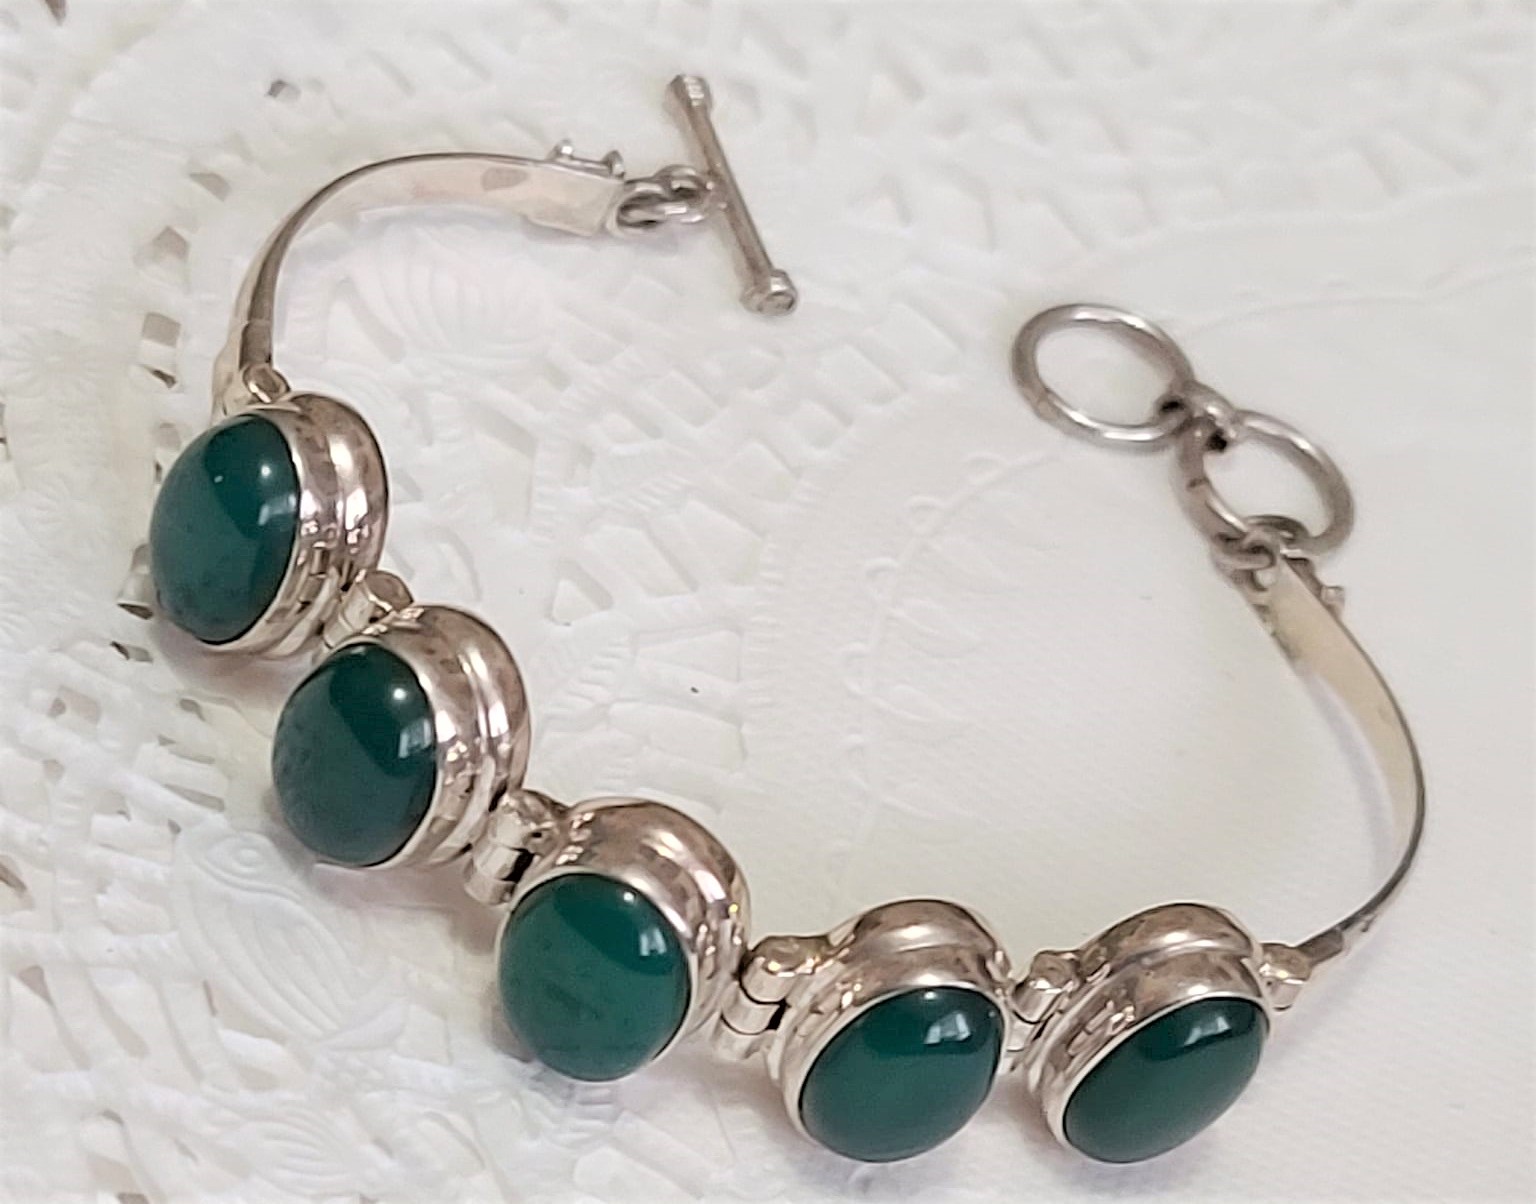 Green Onyx and 925 Sterling Silver Bracelet